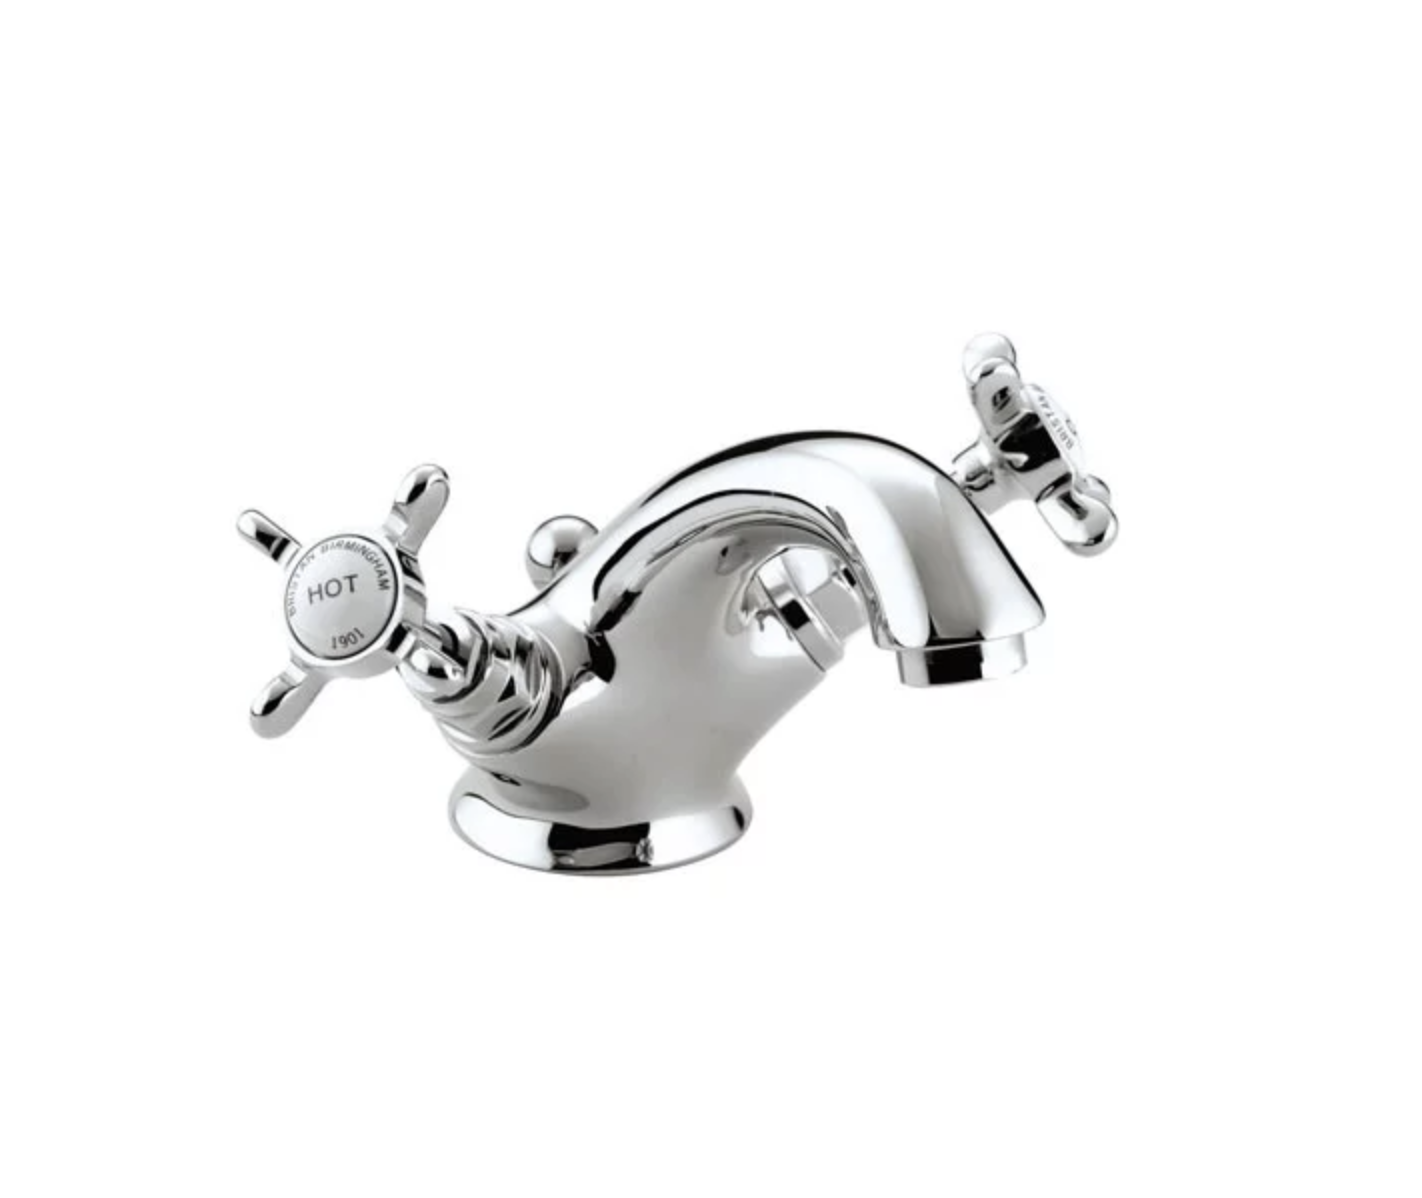 Bristan 1901 Traditional Pop Up Waste Basin Mixer Tap with Ceramic Disc Valves - Chrome 